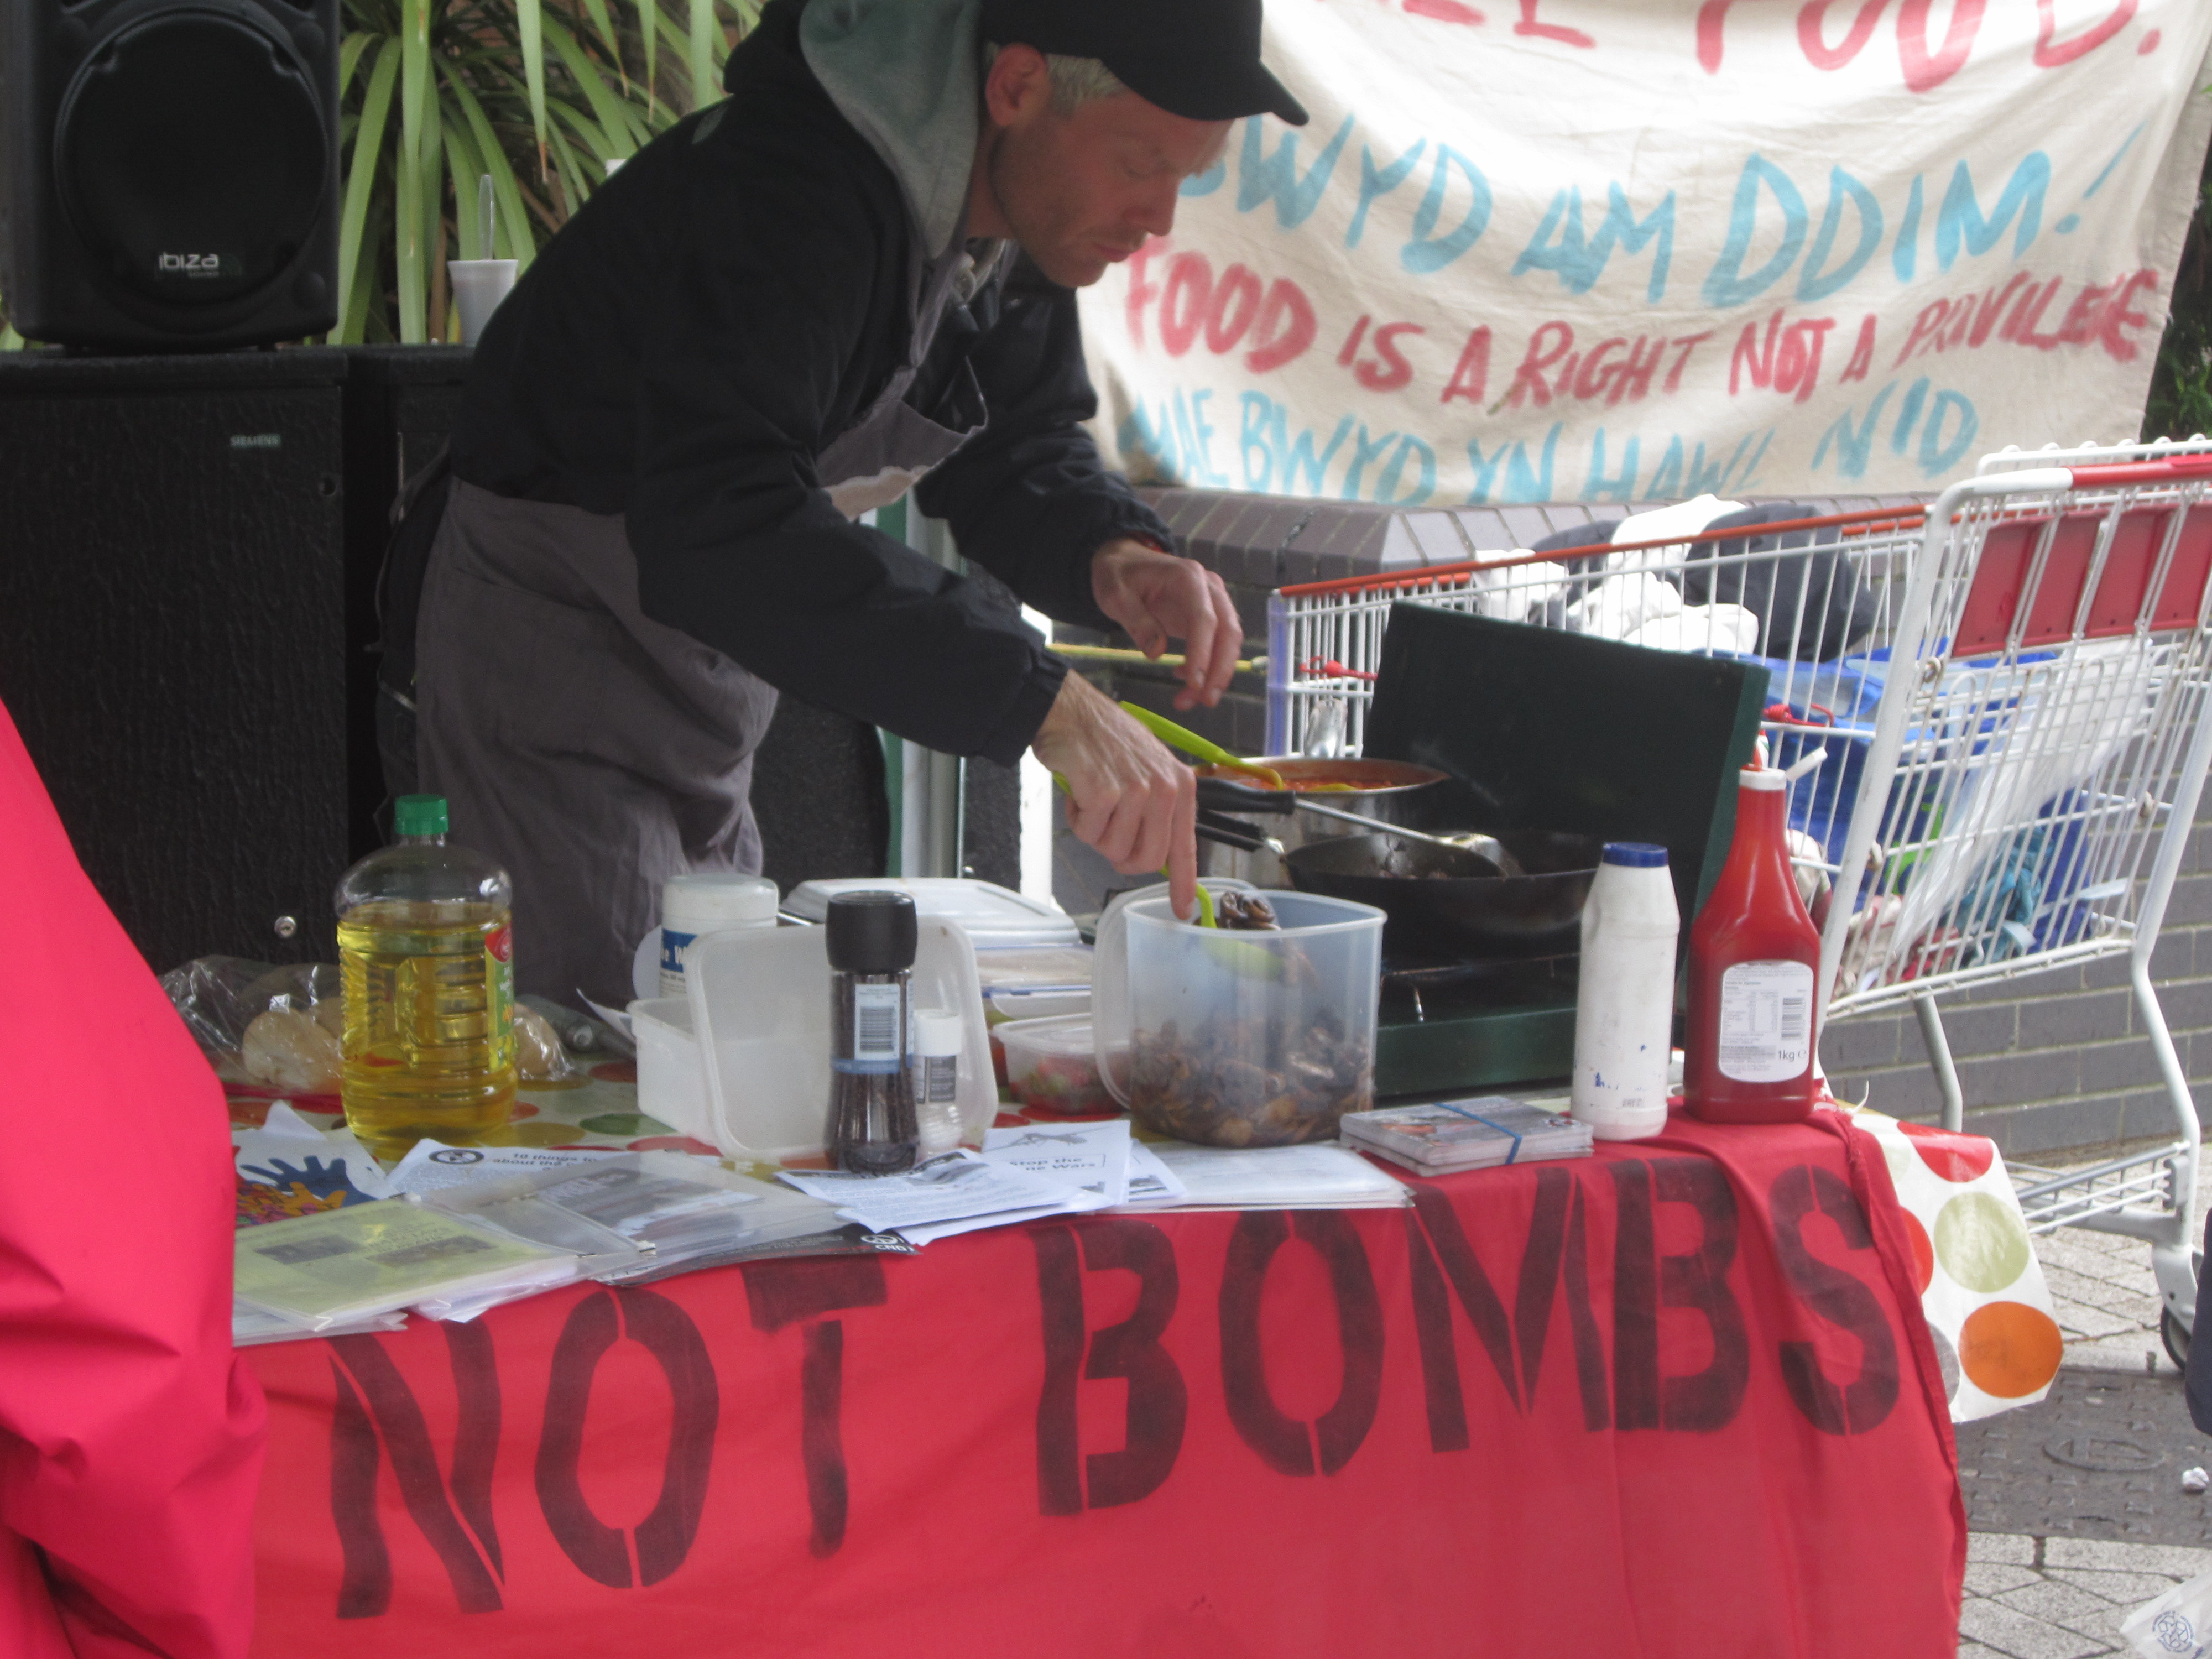 Food Not Bombs activists give out free breakfasts to passers by at the protest